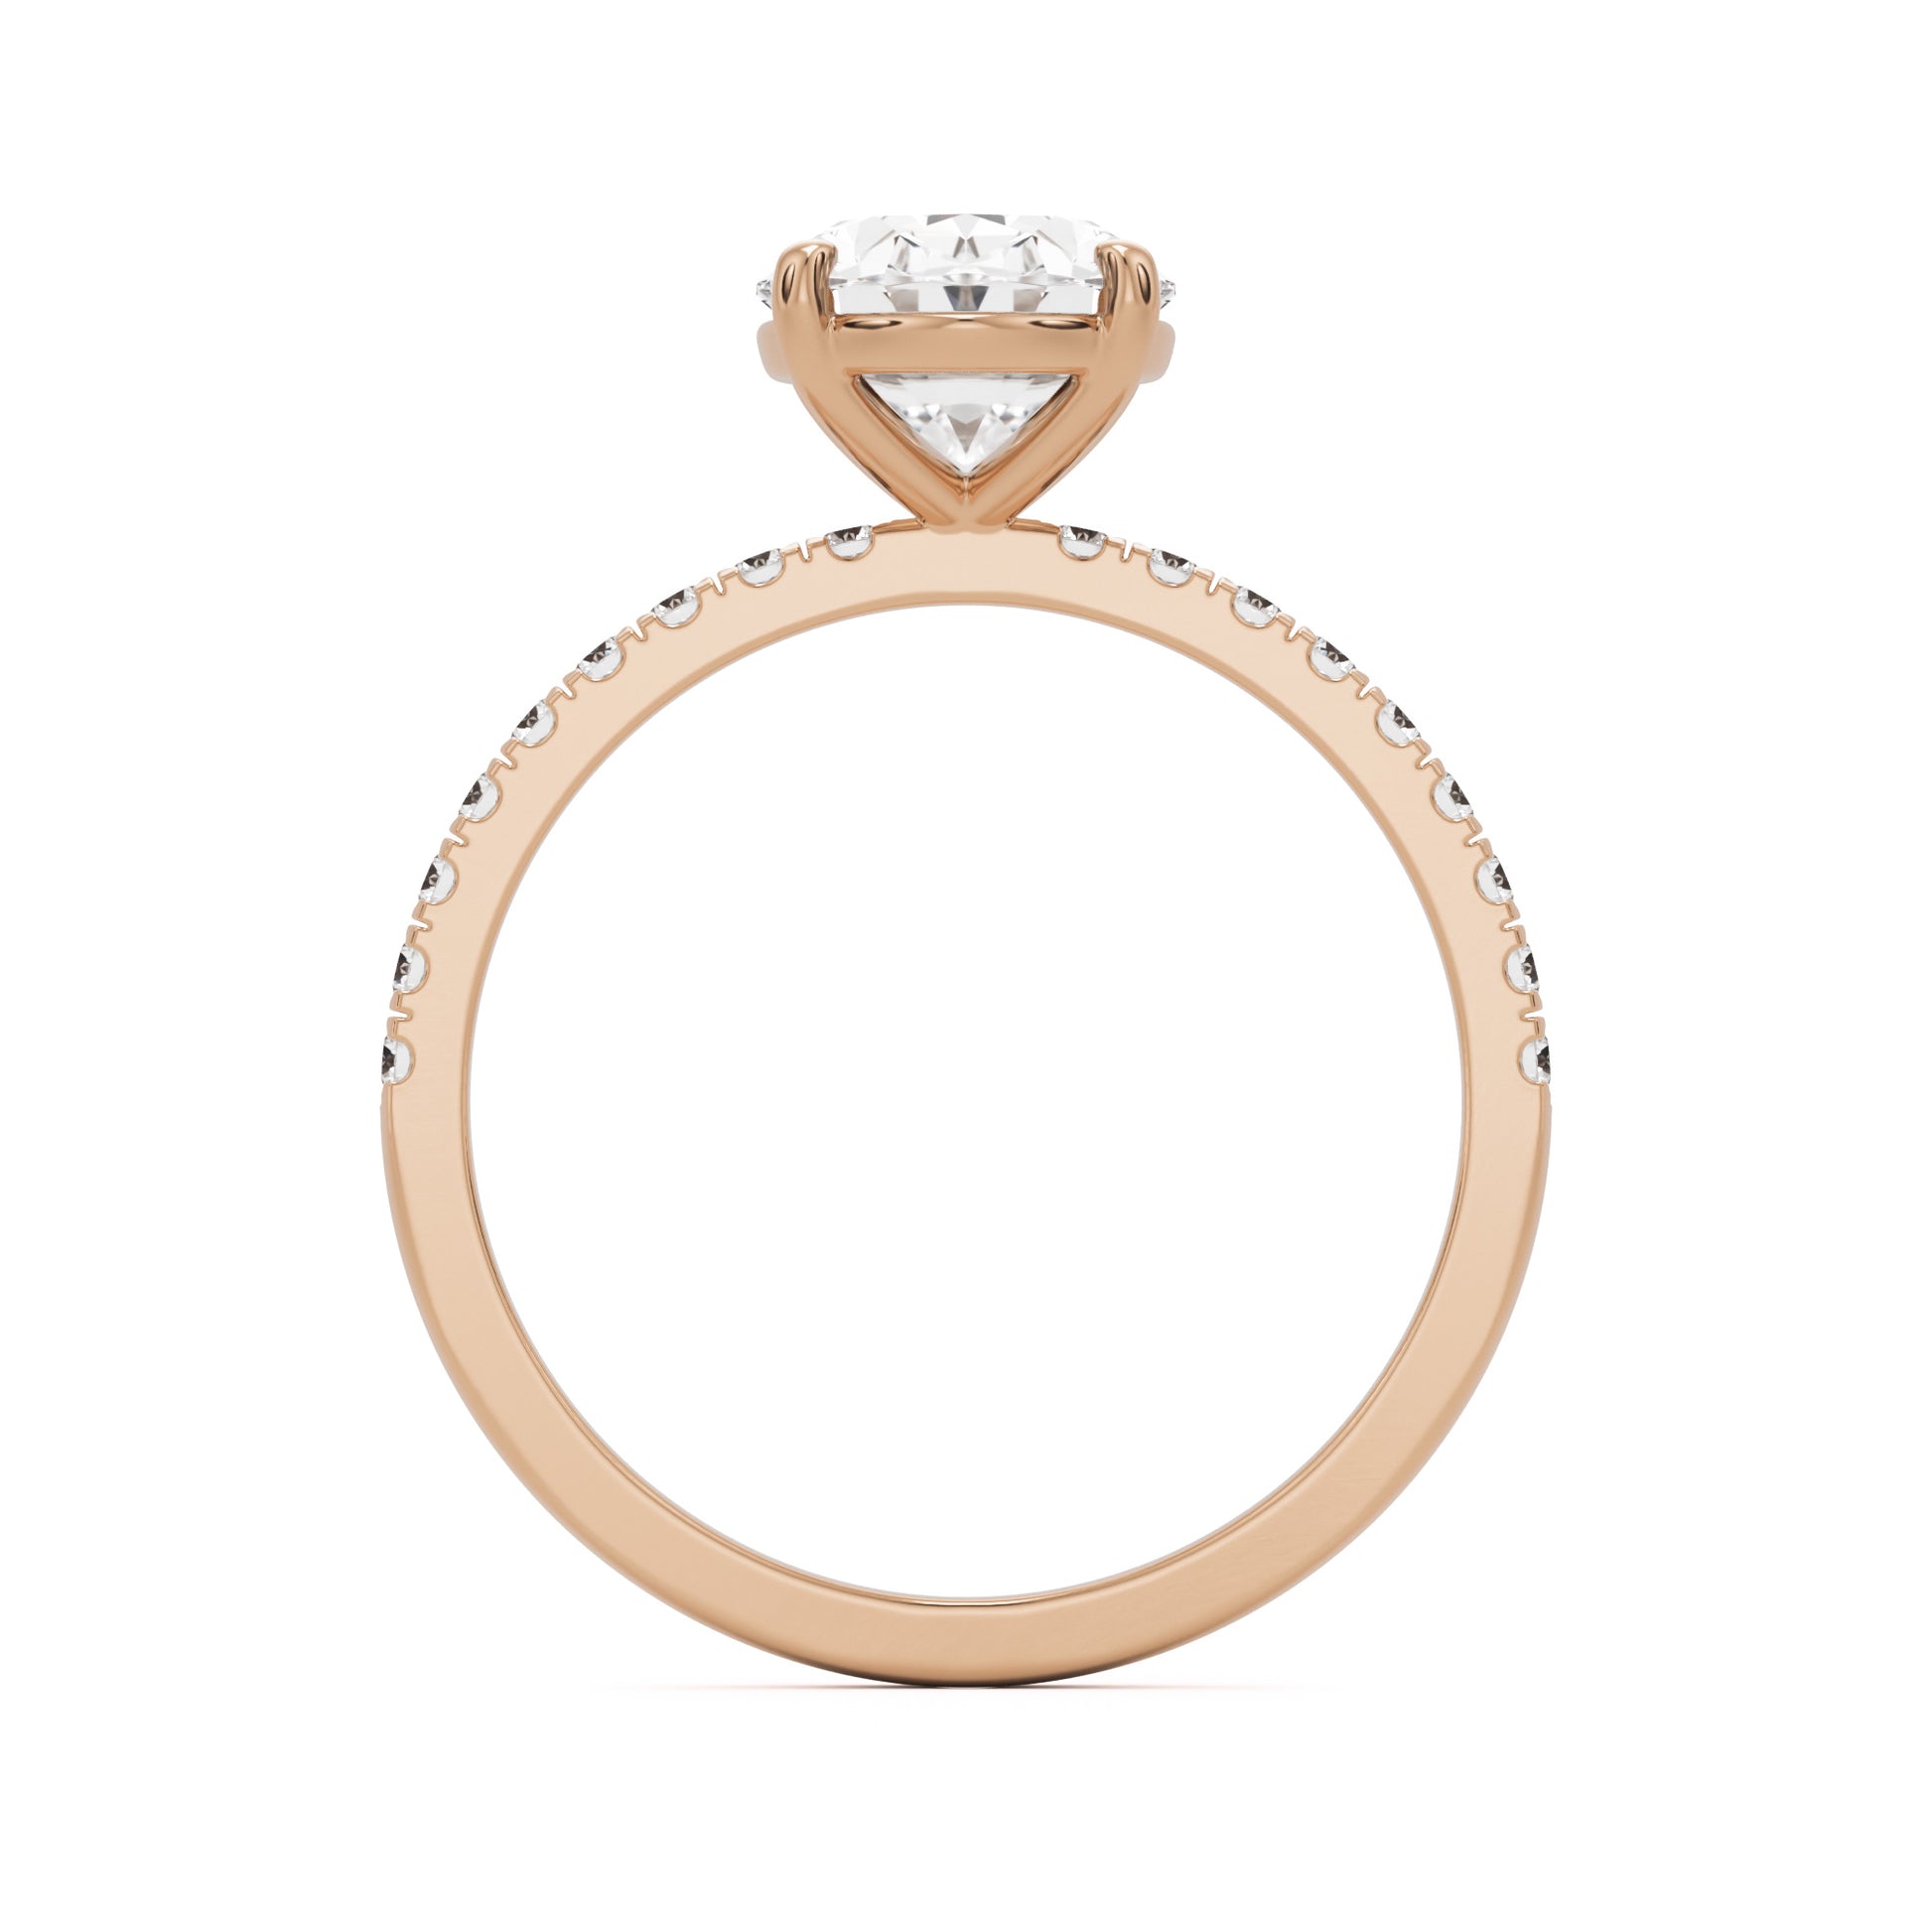 oval solitaire pave 14k rose gold